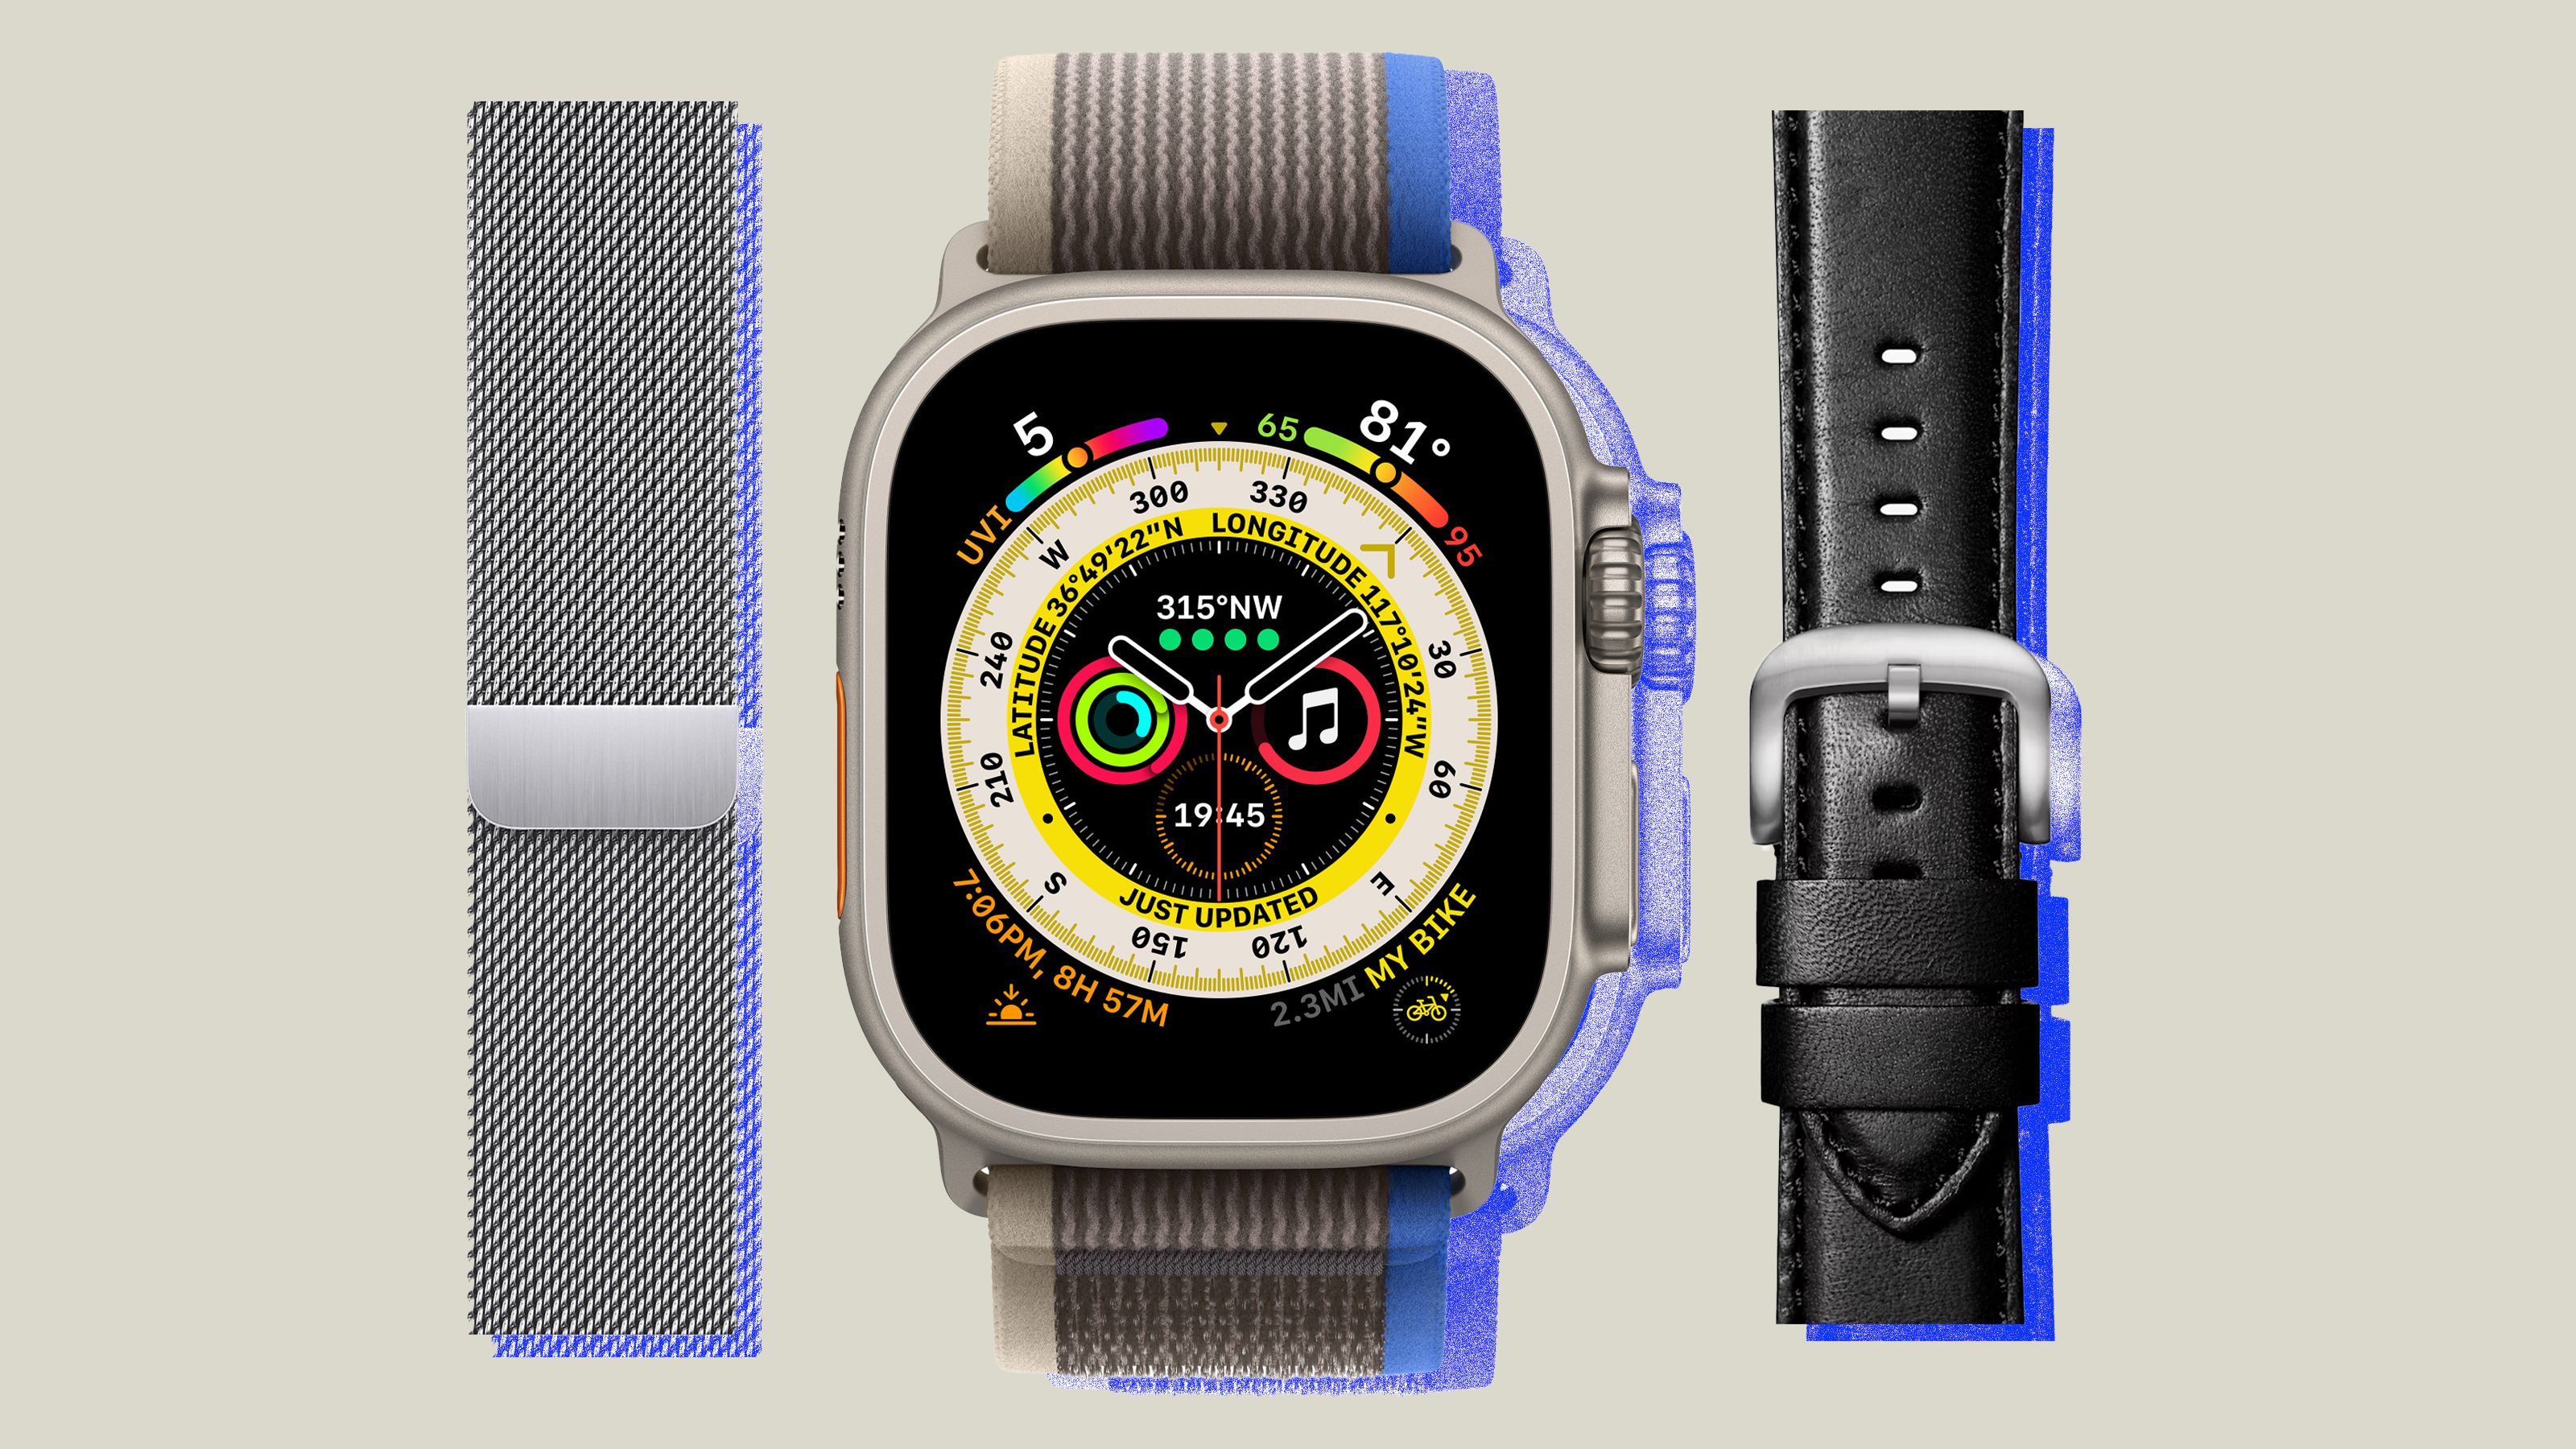 Apple Watch Bands – BeStitched Needlepoint